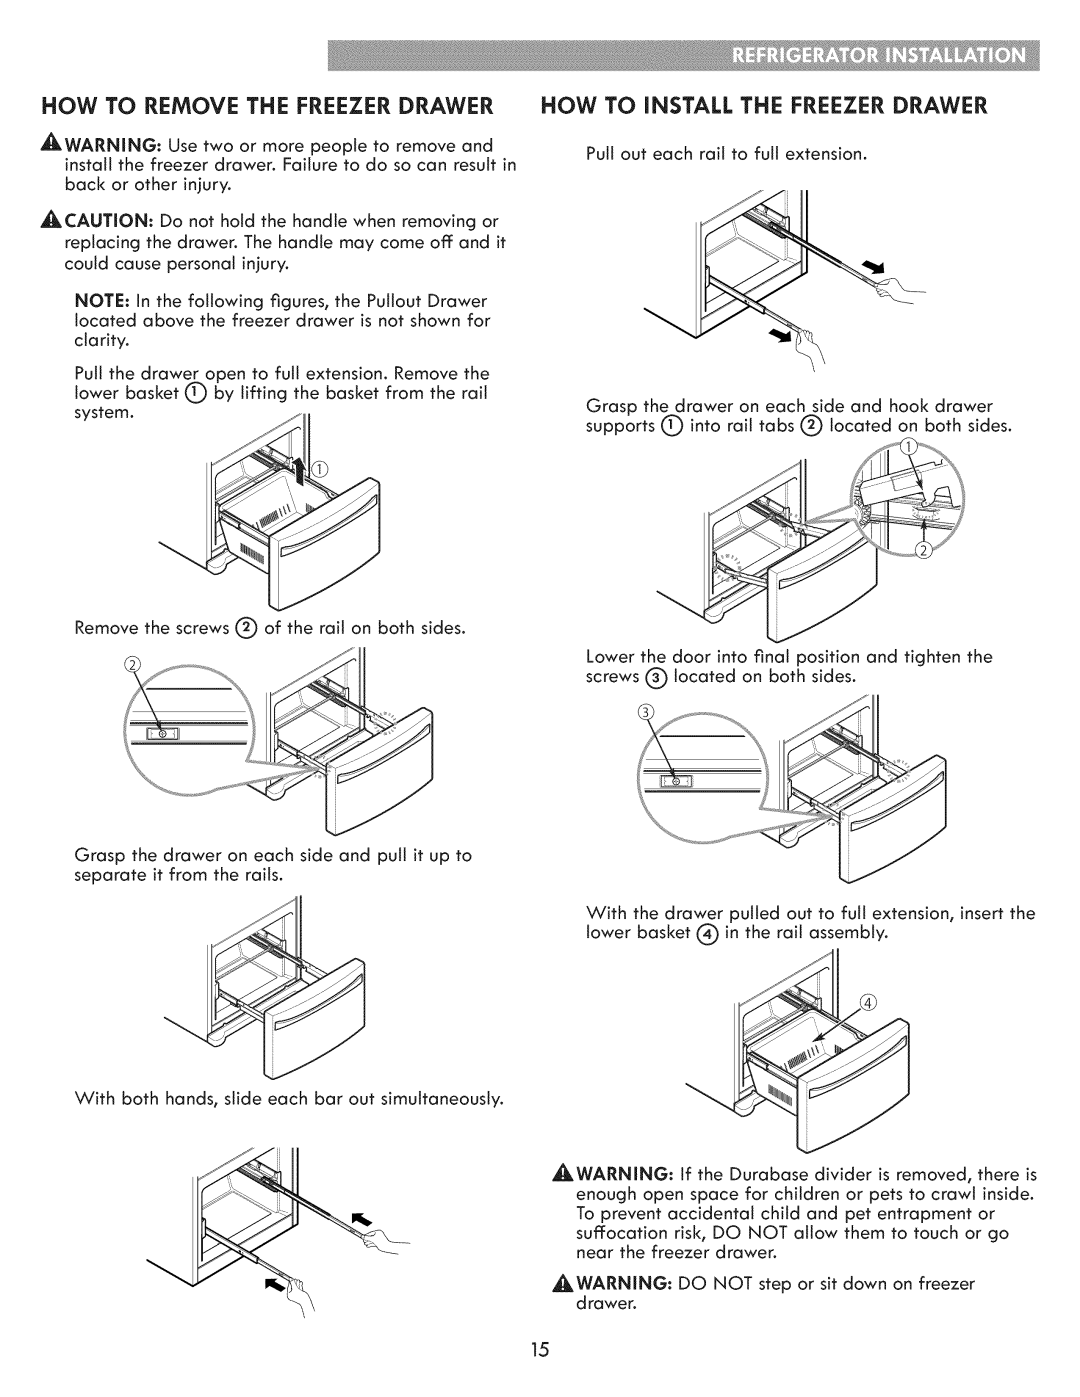 Kenmore 795.7205 manual How To Remove, How To Install The Freezer Drawer 